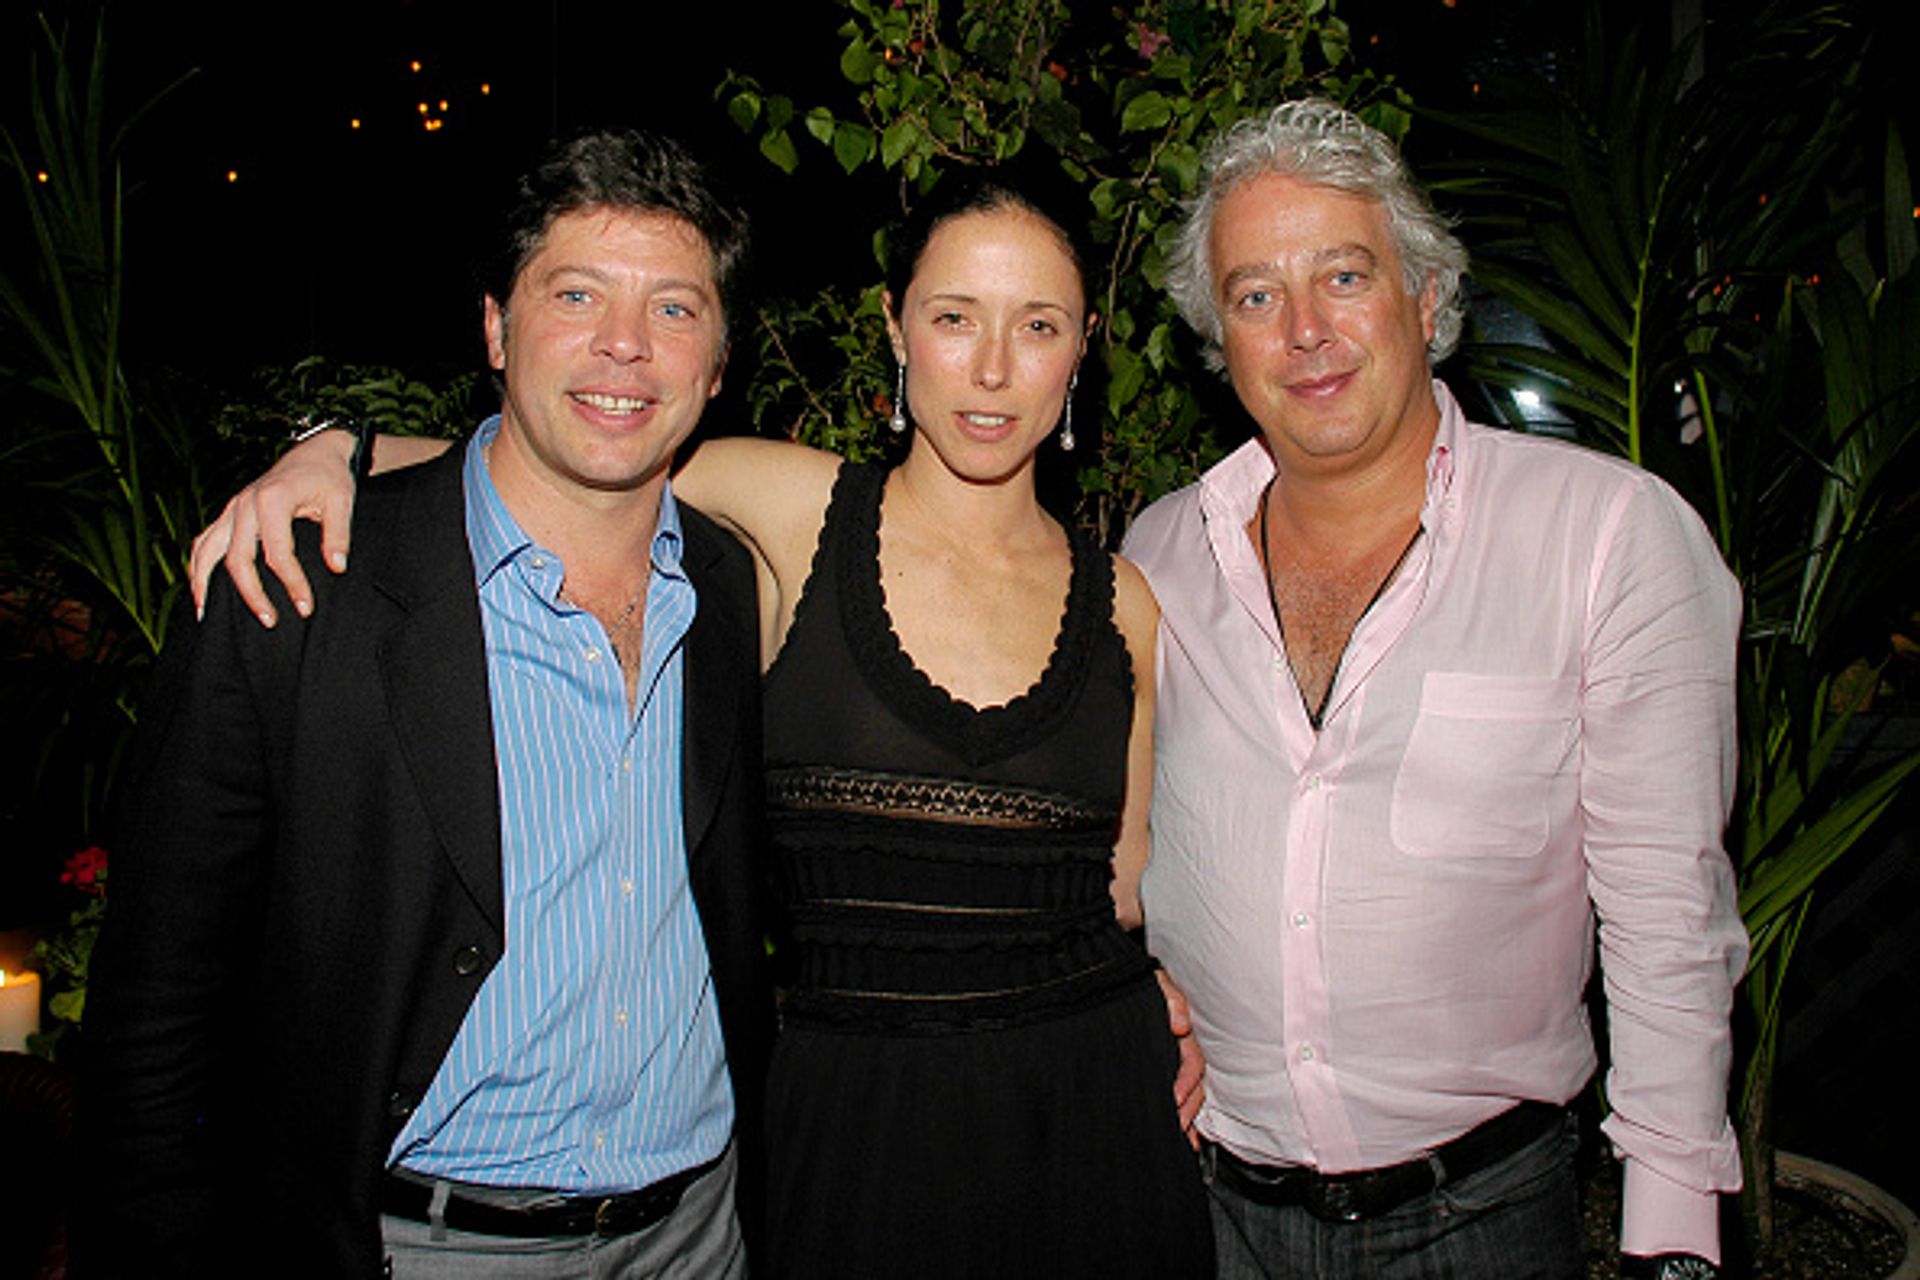 Investor Adam Lindemann (left) and his wife and fellow art dealer Amalia Dayan, with real estate mogul Aby Rosen (right) with art dealer Amalia Dayan at a party at Gramercy Park Hotel. Photo by Patrick McMullan/Patrick McMullan via Getty Images